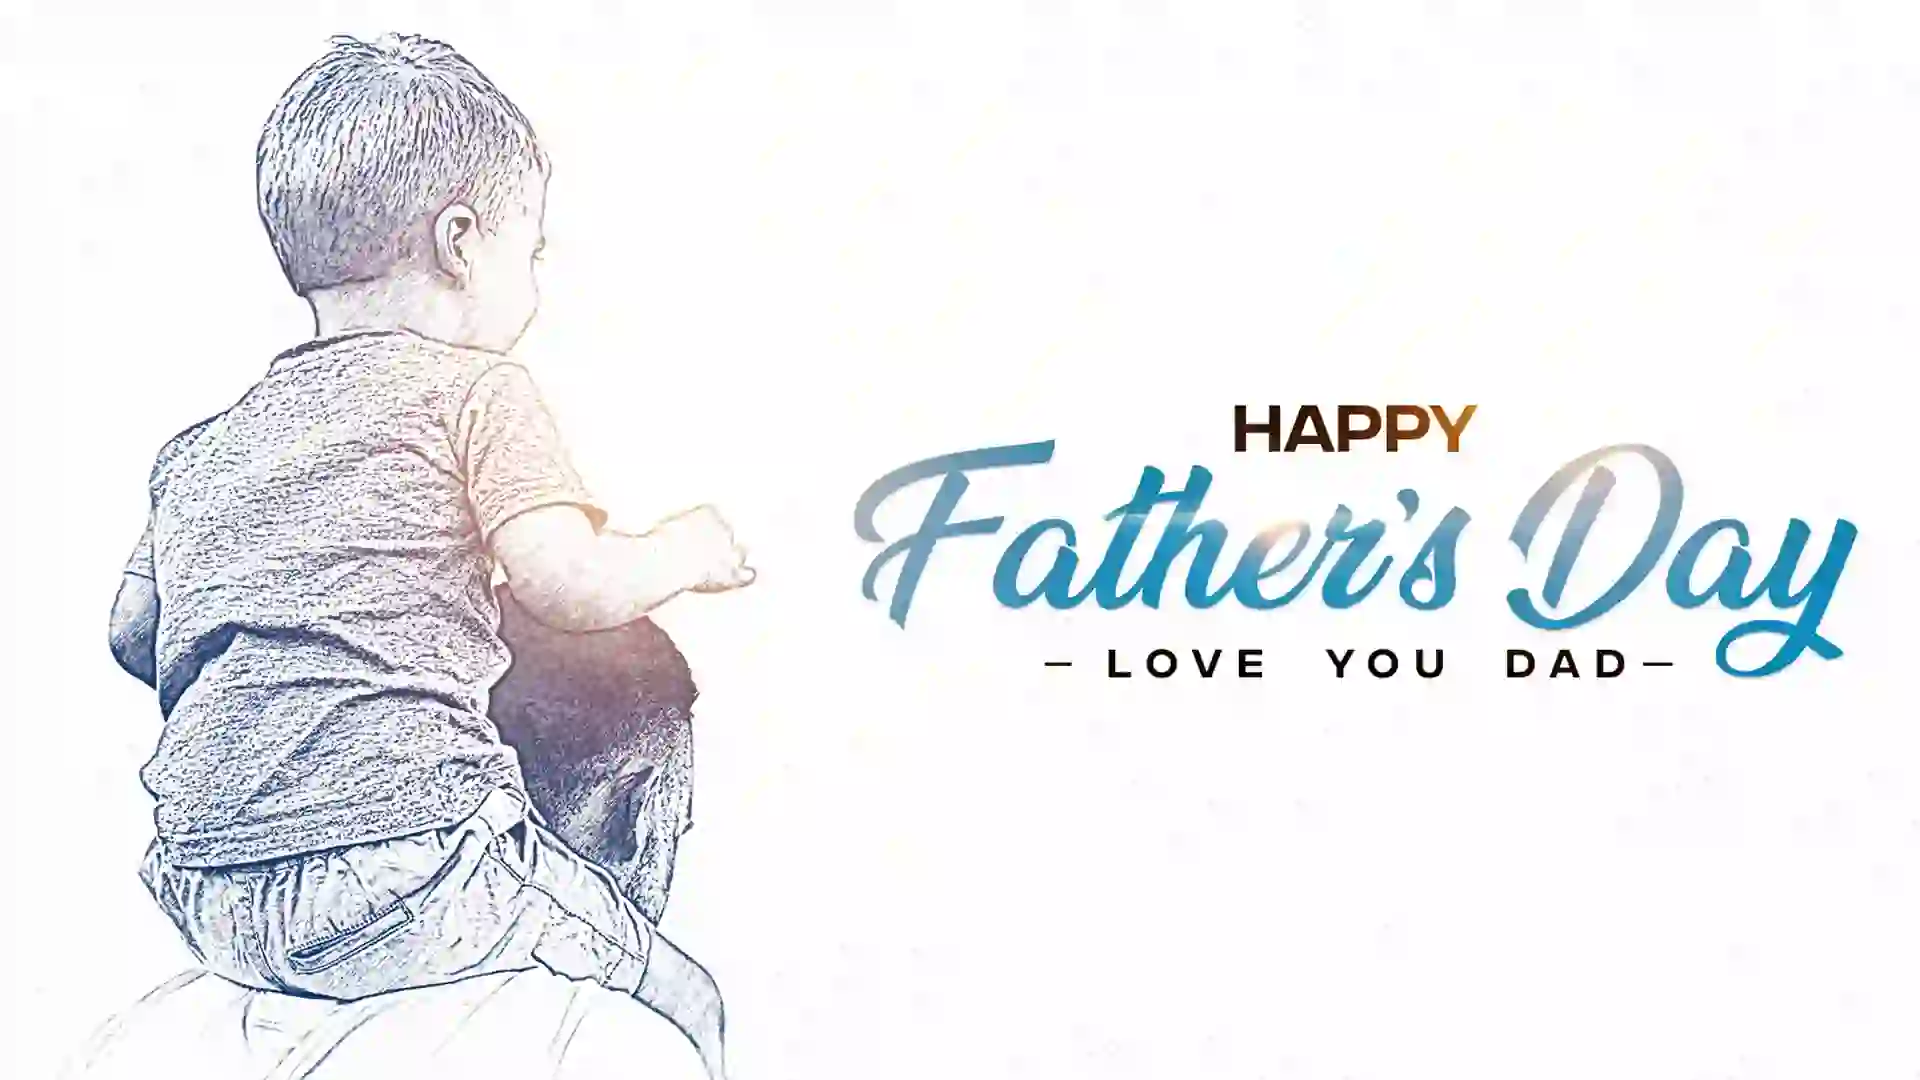 Father’s Day This Post Design By The Revolution Deshbhakt Hindustani